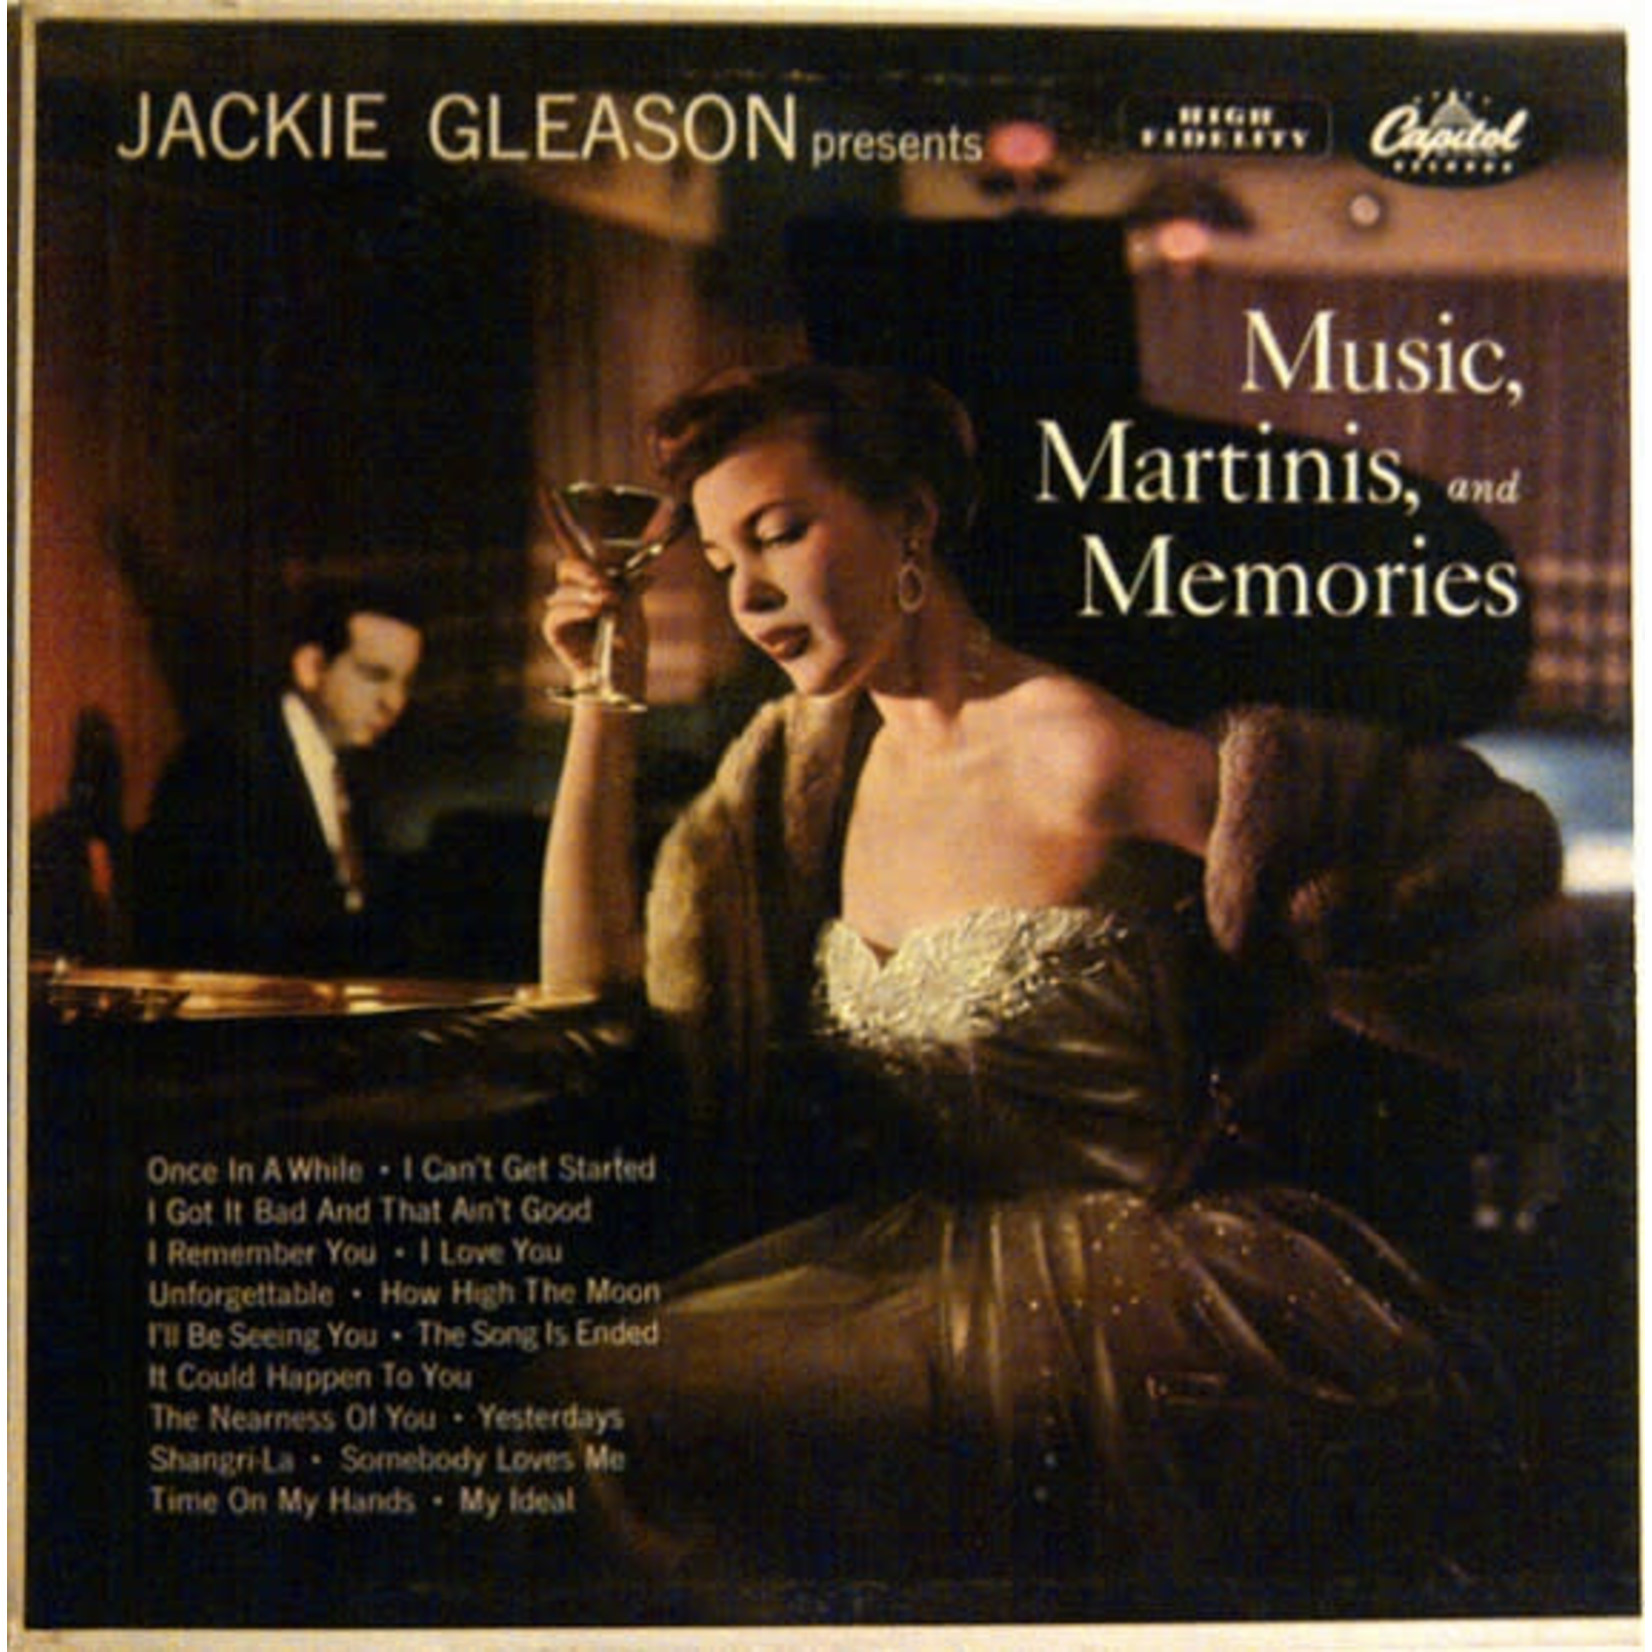 Jackie Gleason Jackie Gleason – Jackie Gleason Presents Music, Martinis, And Memories (LP, W509, G)